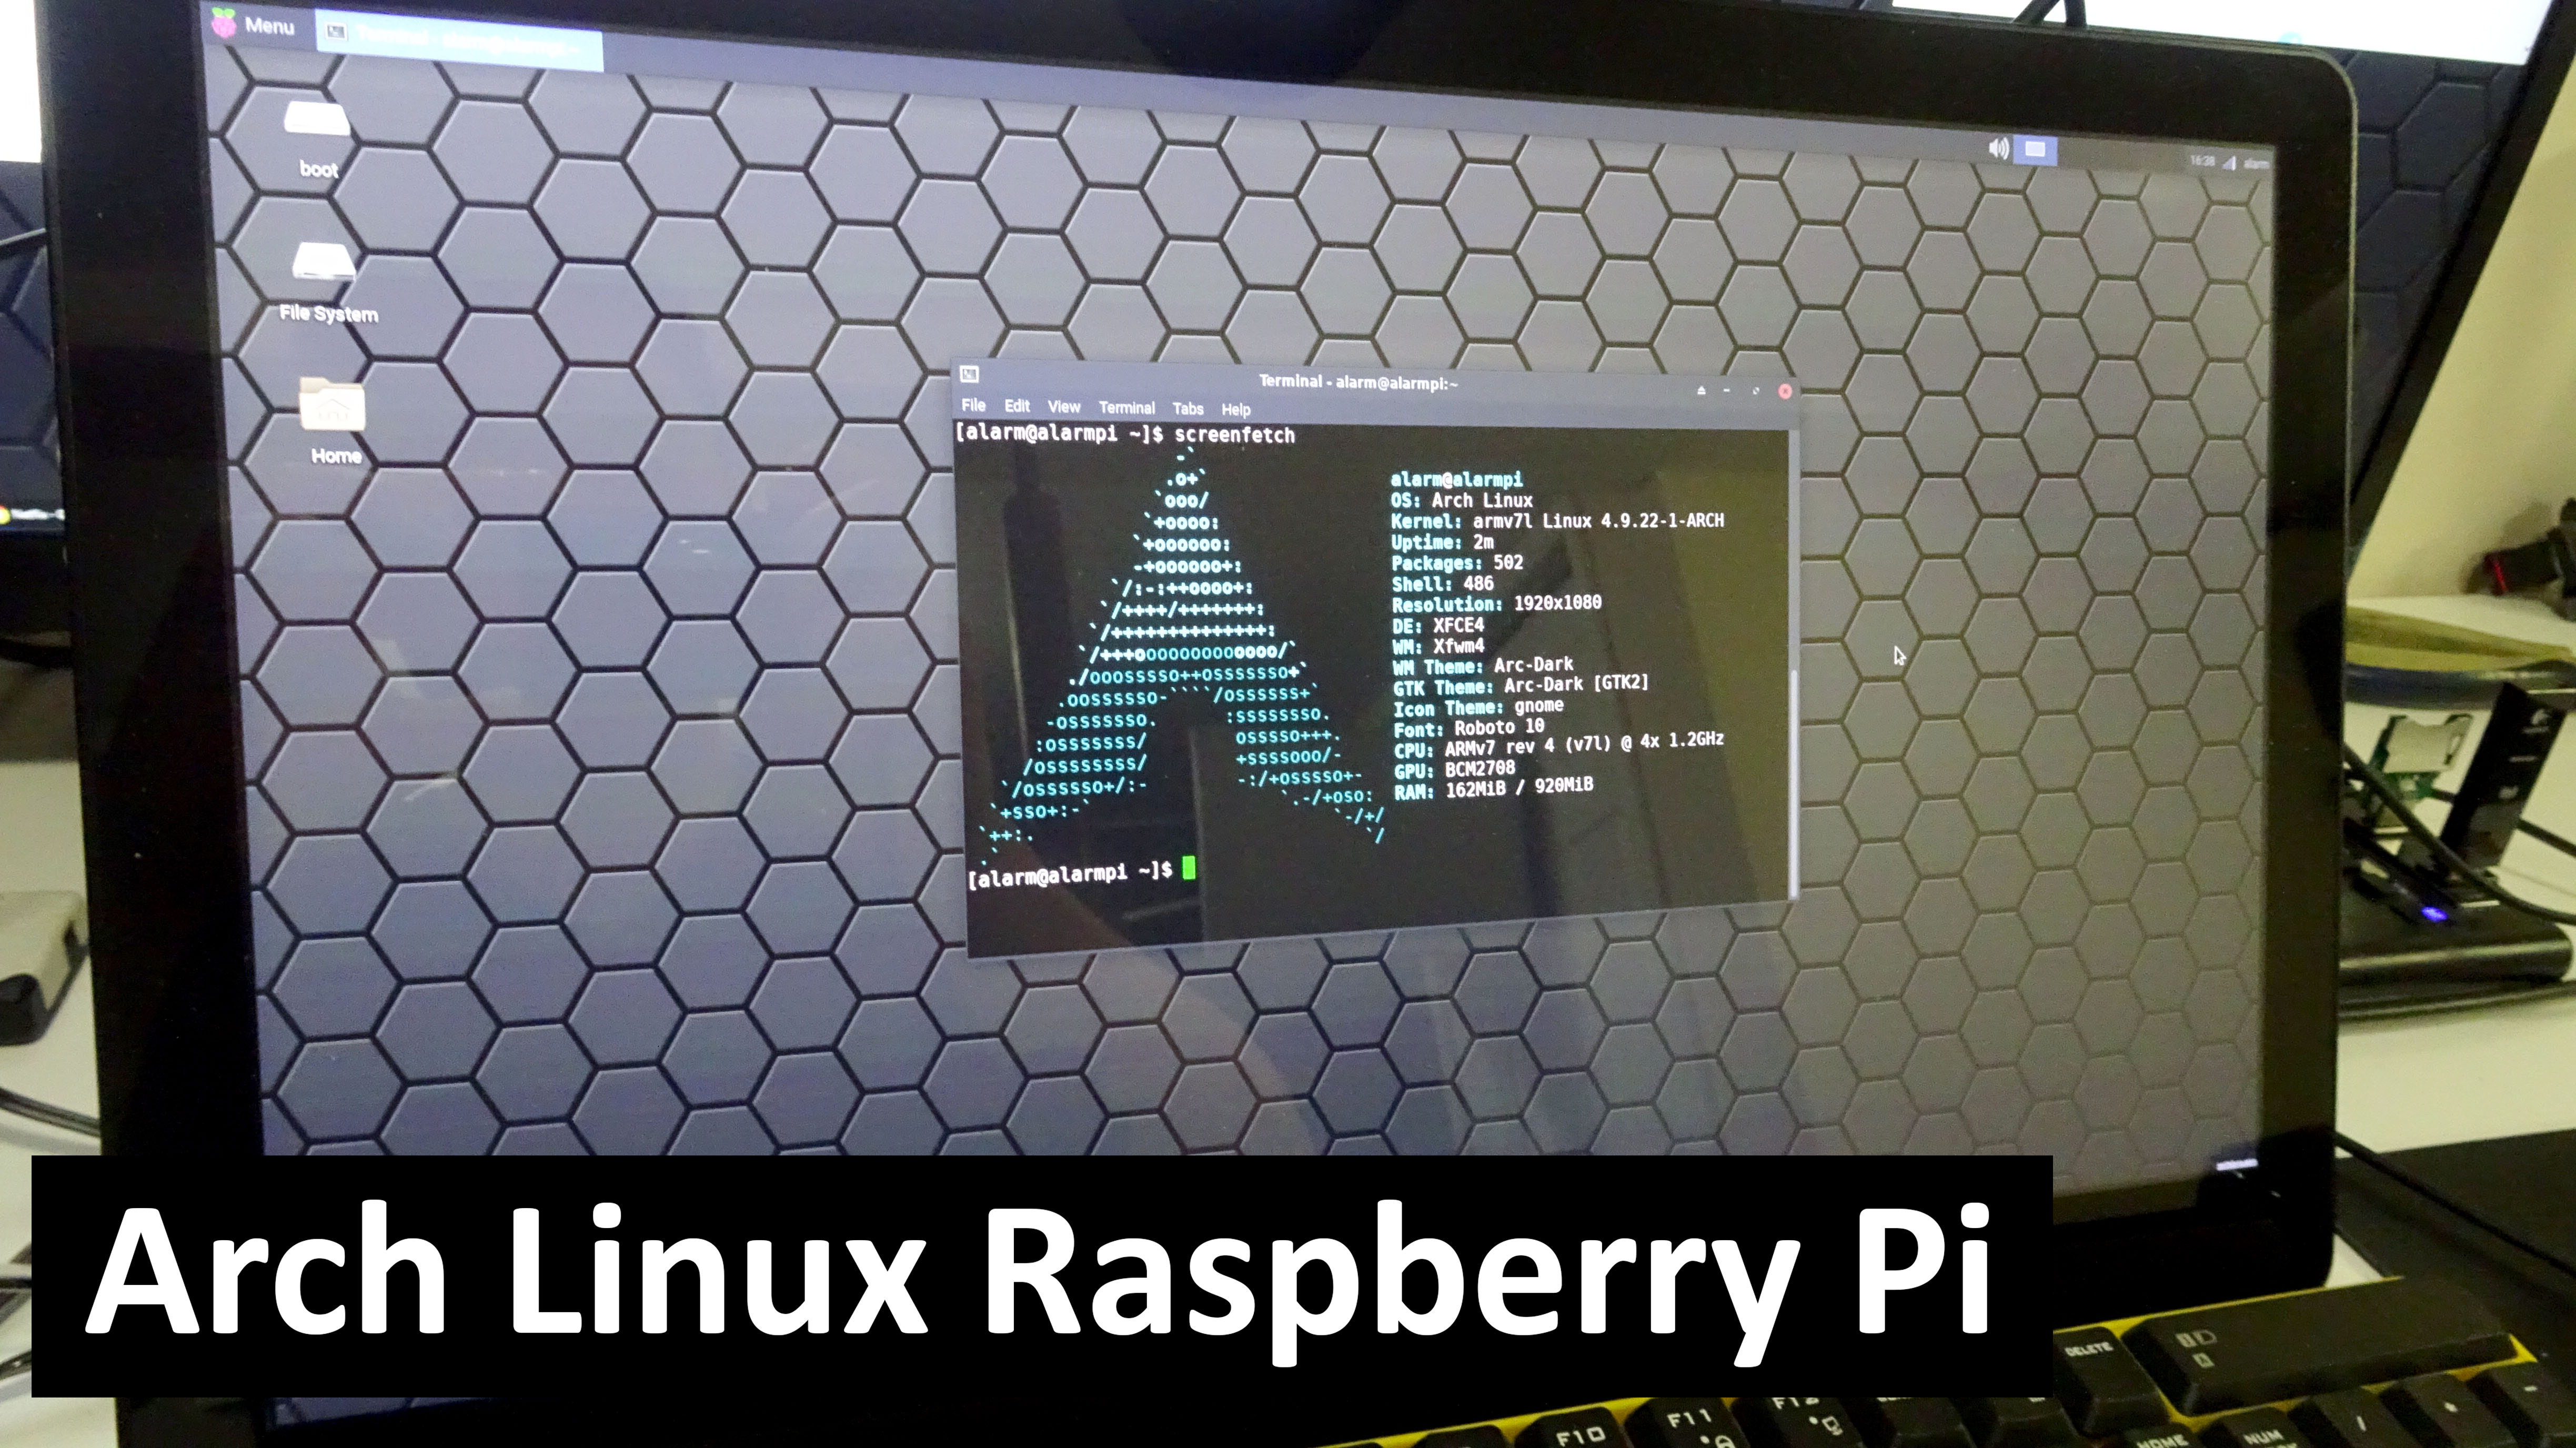 Installing Arch Linux on Raspberry Pi